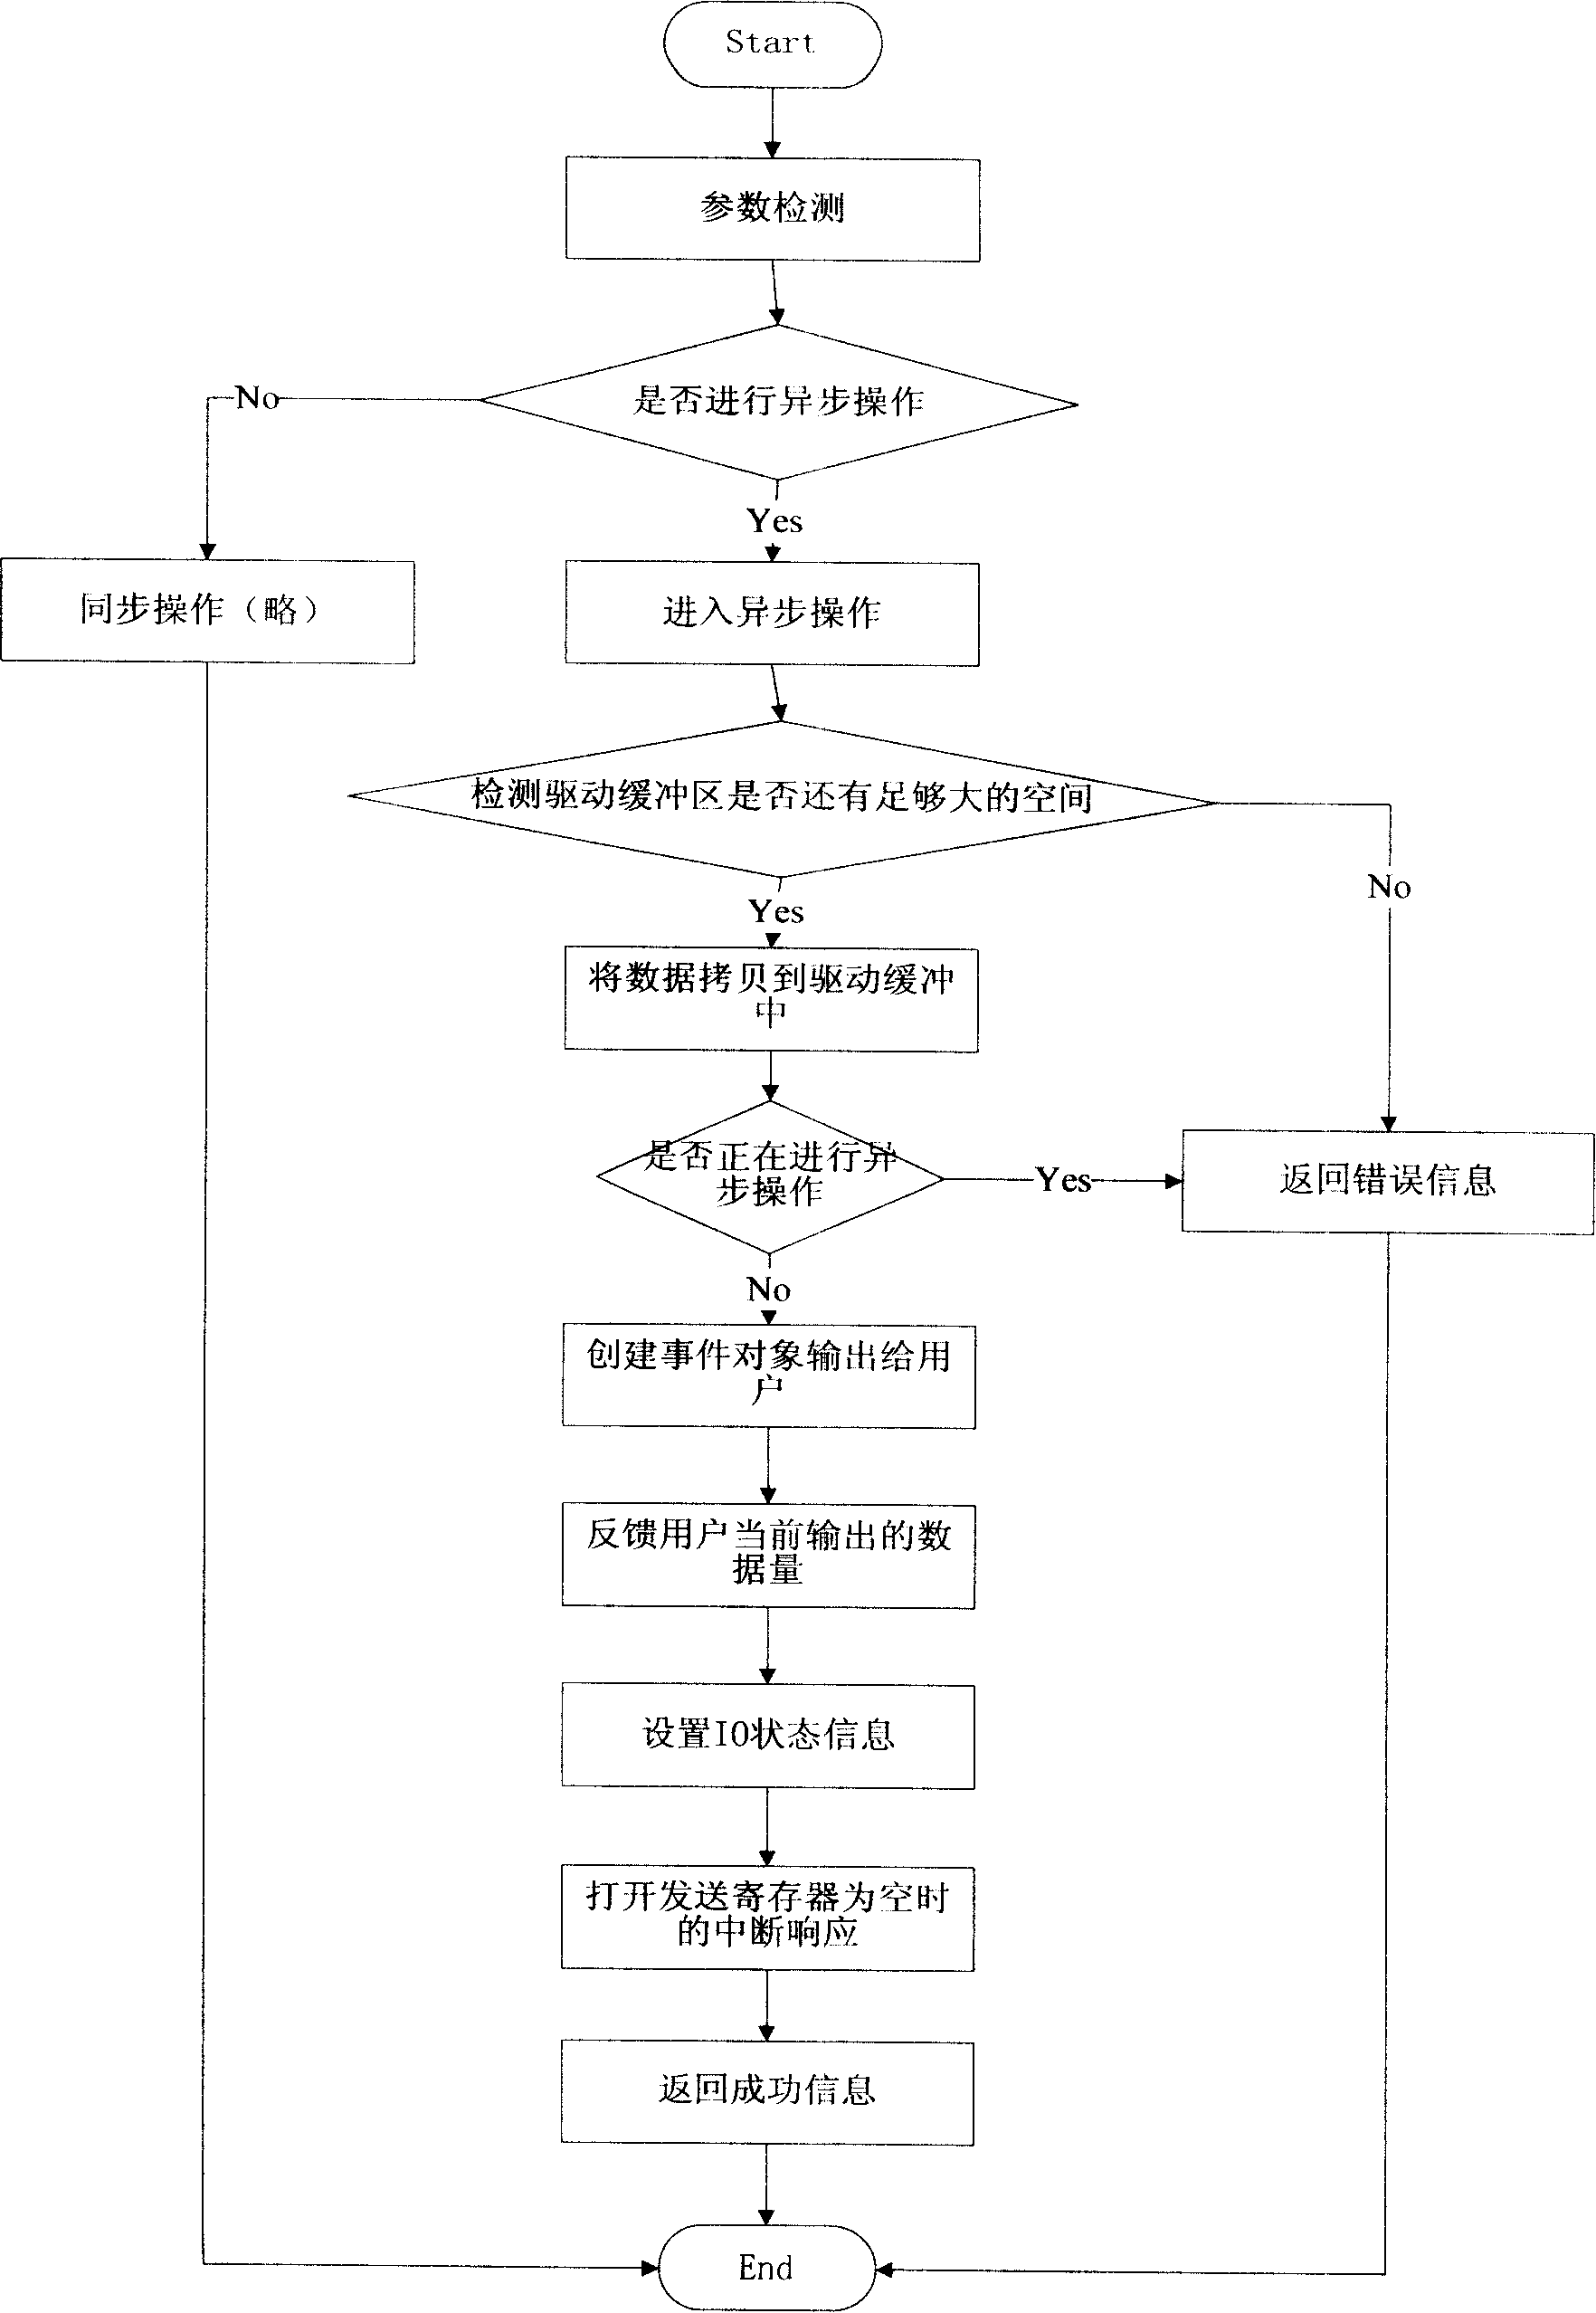 Asynchronous output incoming signal processing method